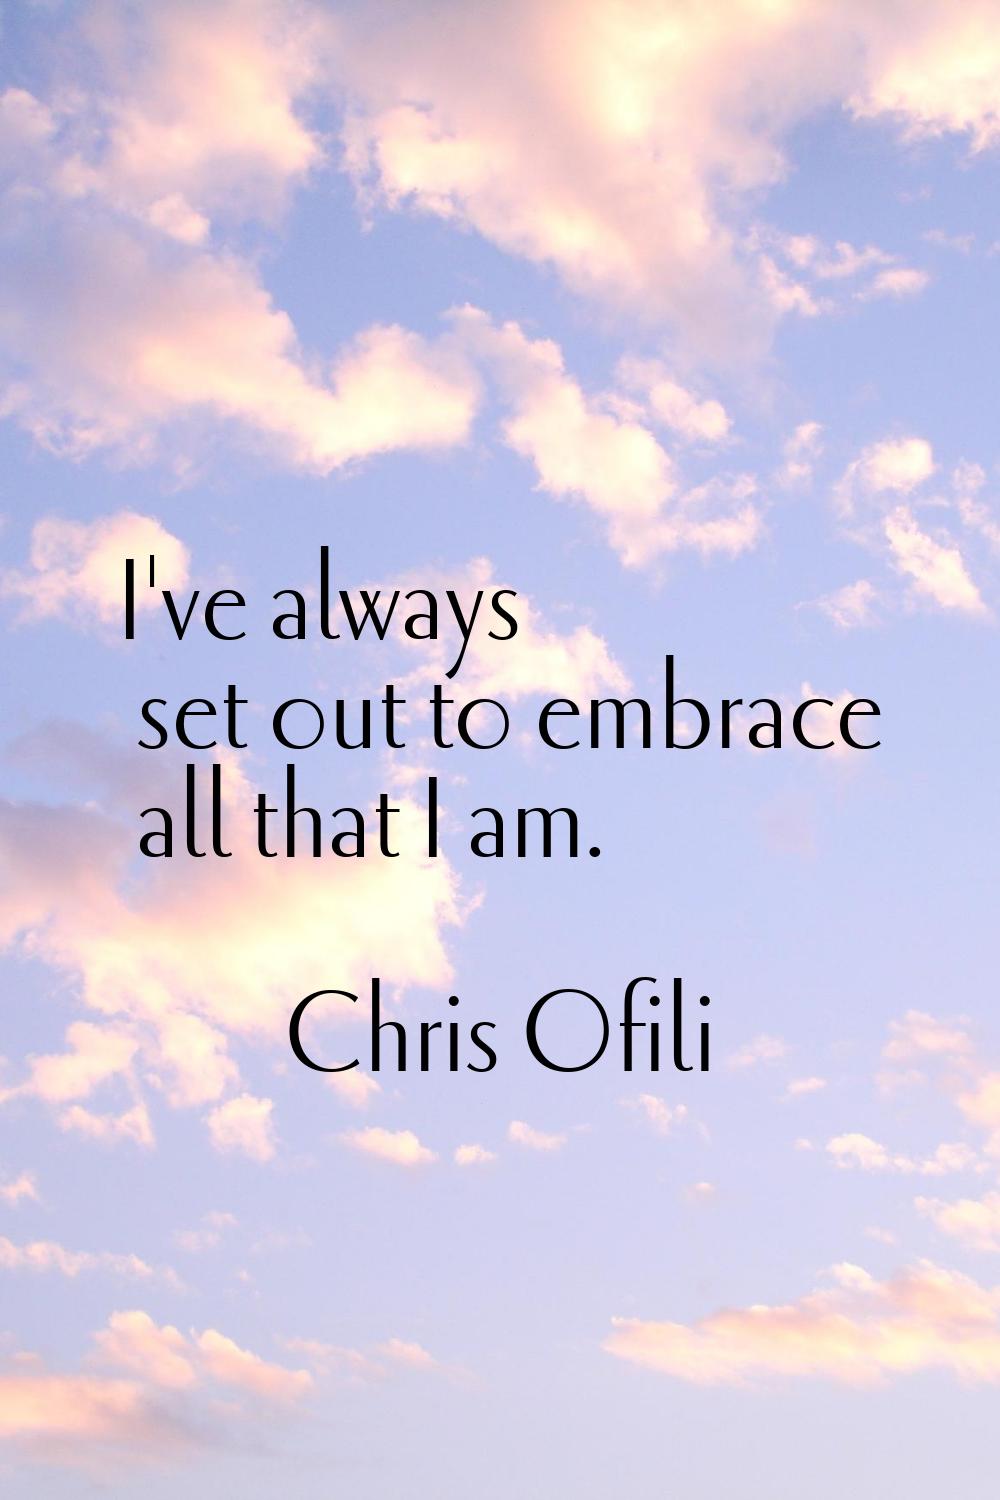 I've always set out to embrace all that I am.